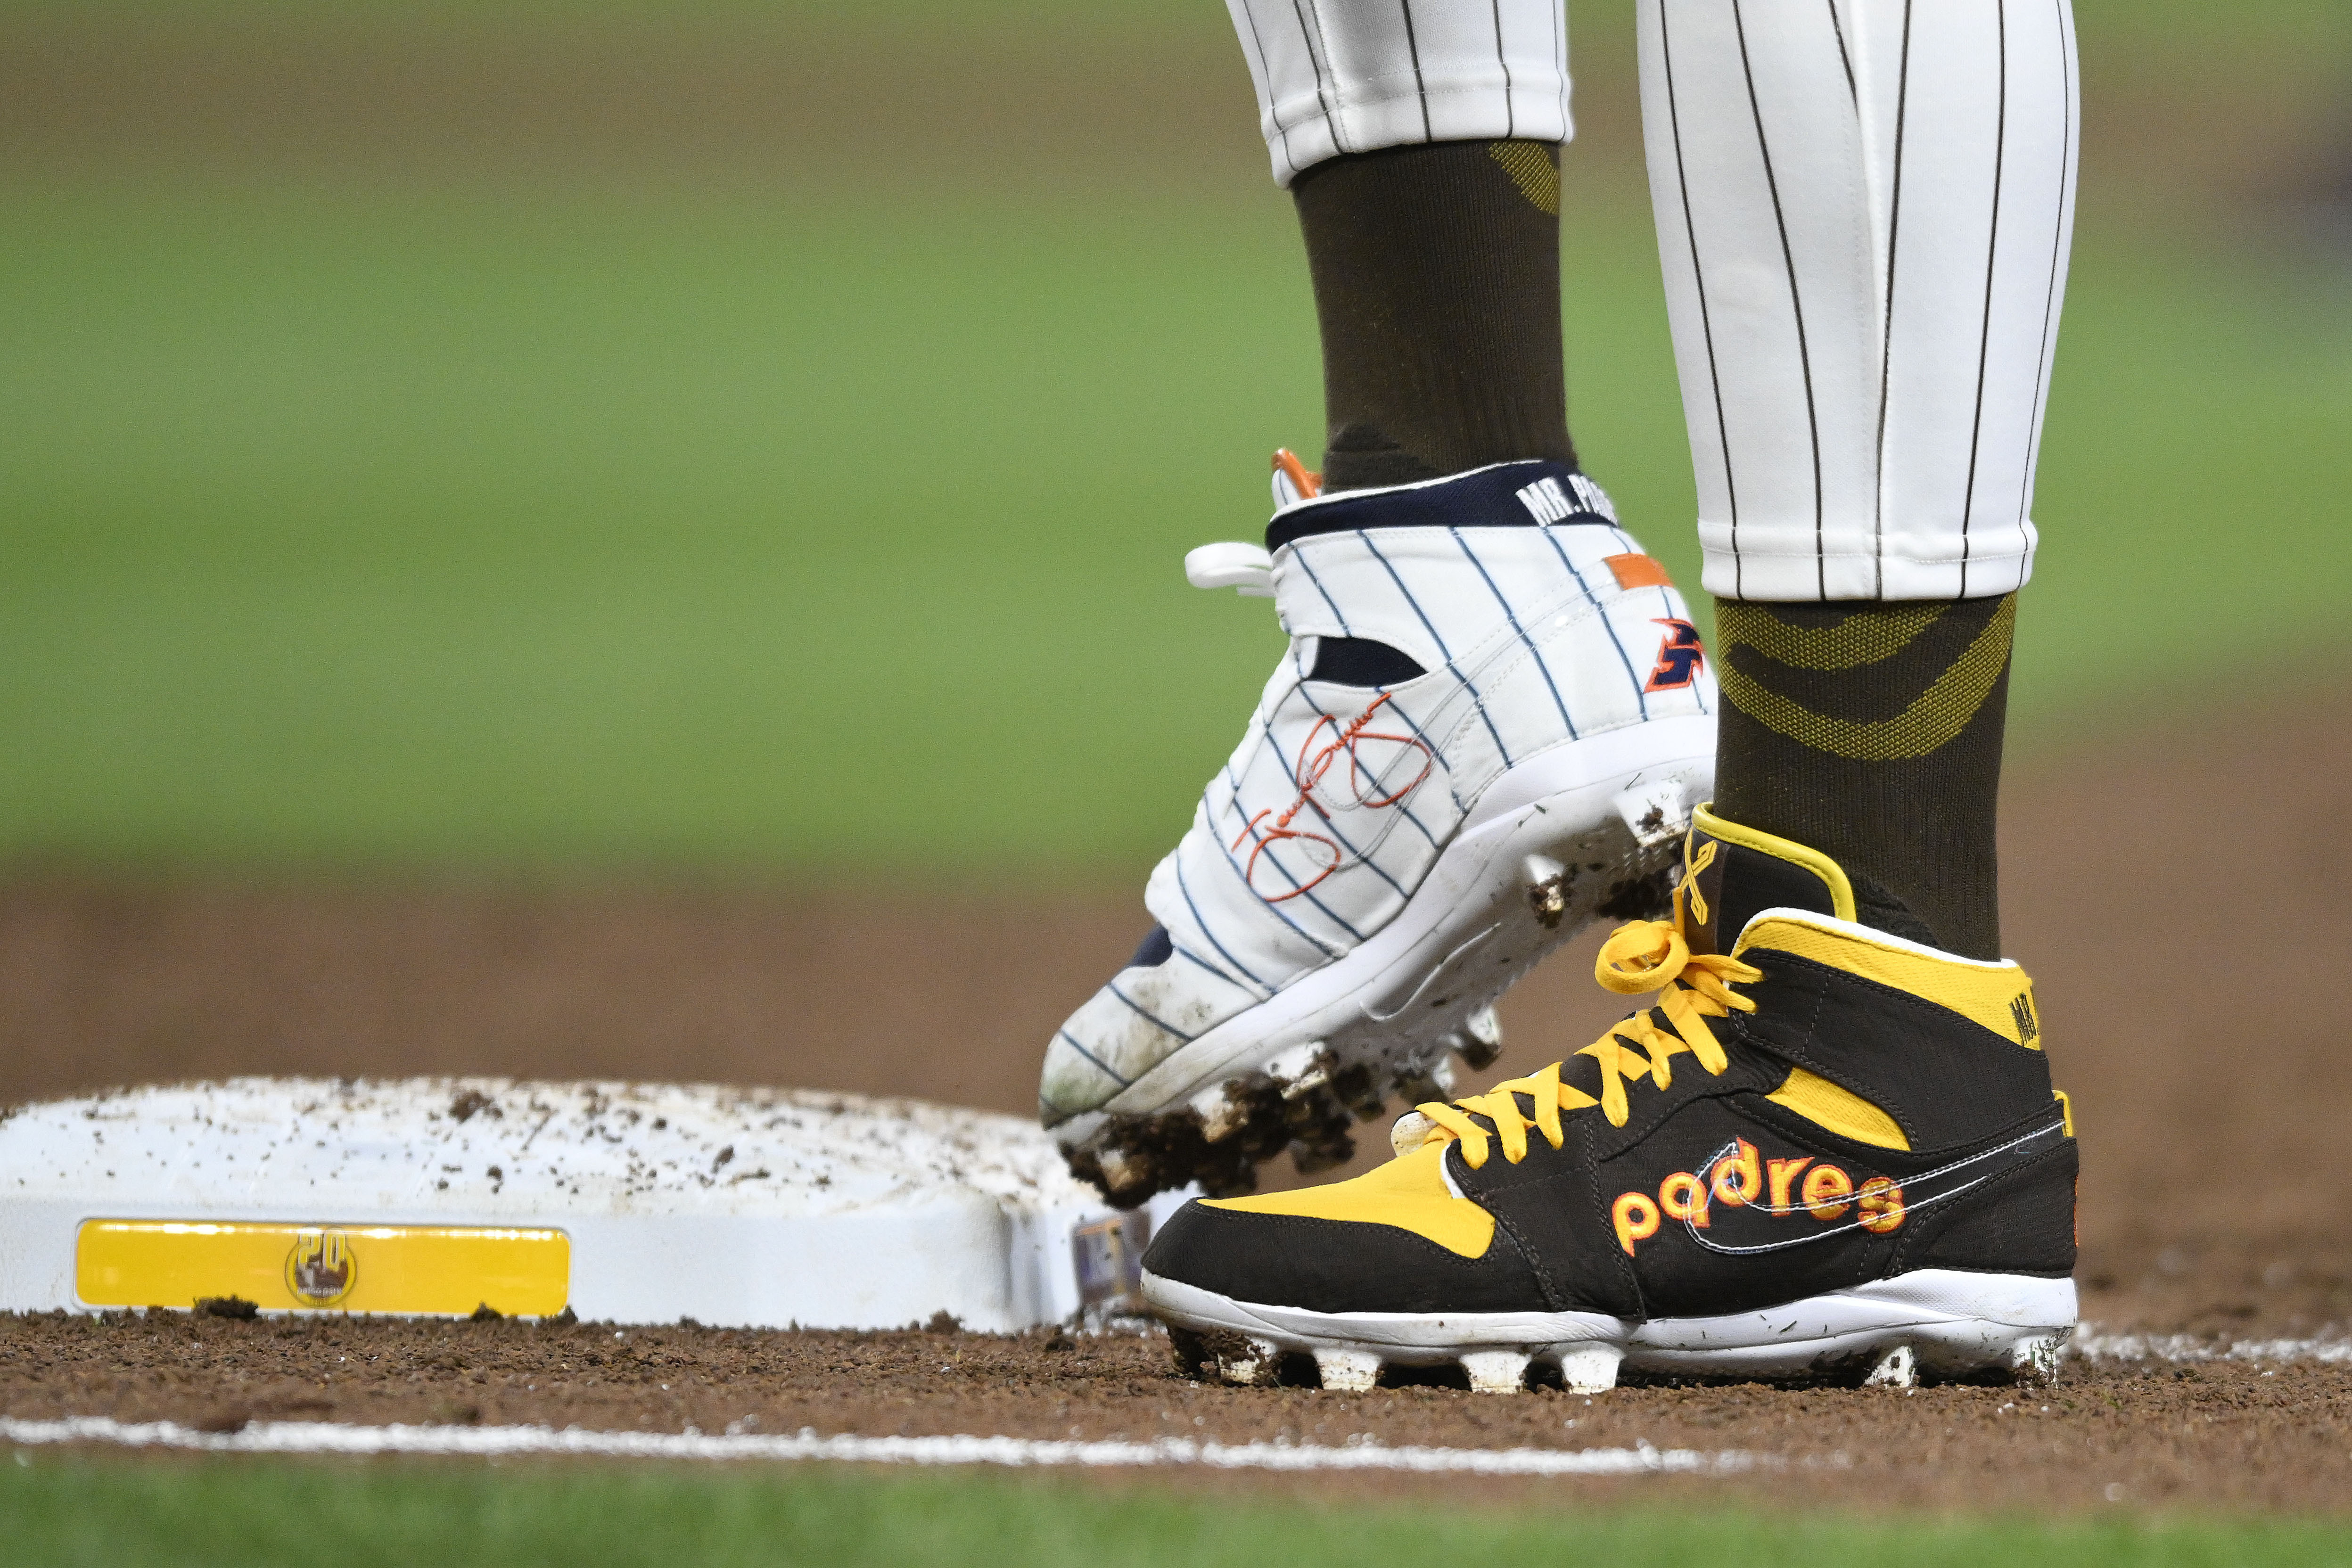 cleats commemorating the Padres's 1980's and 1990's teams